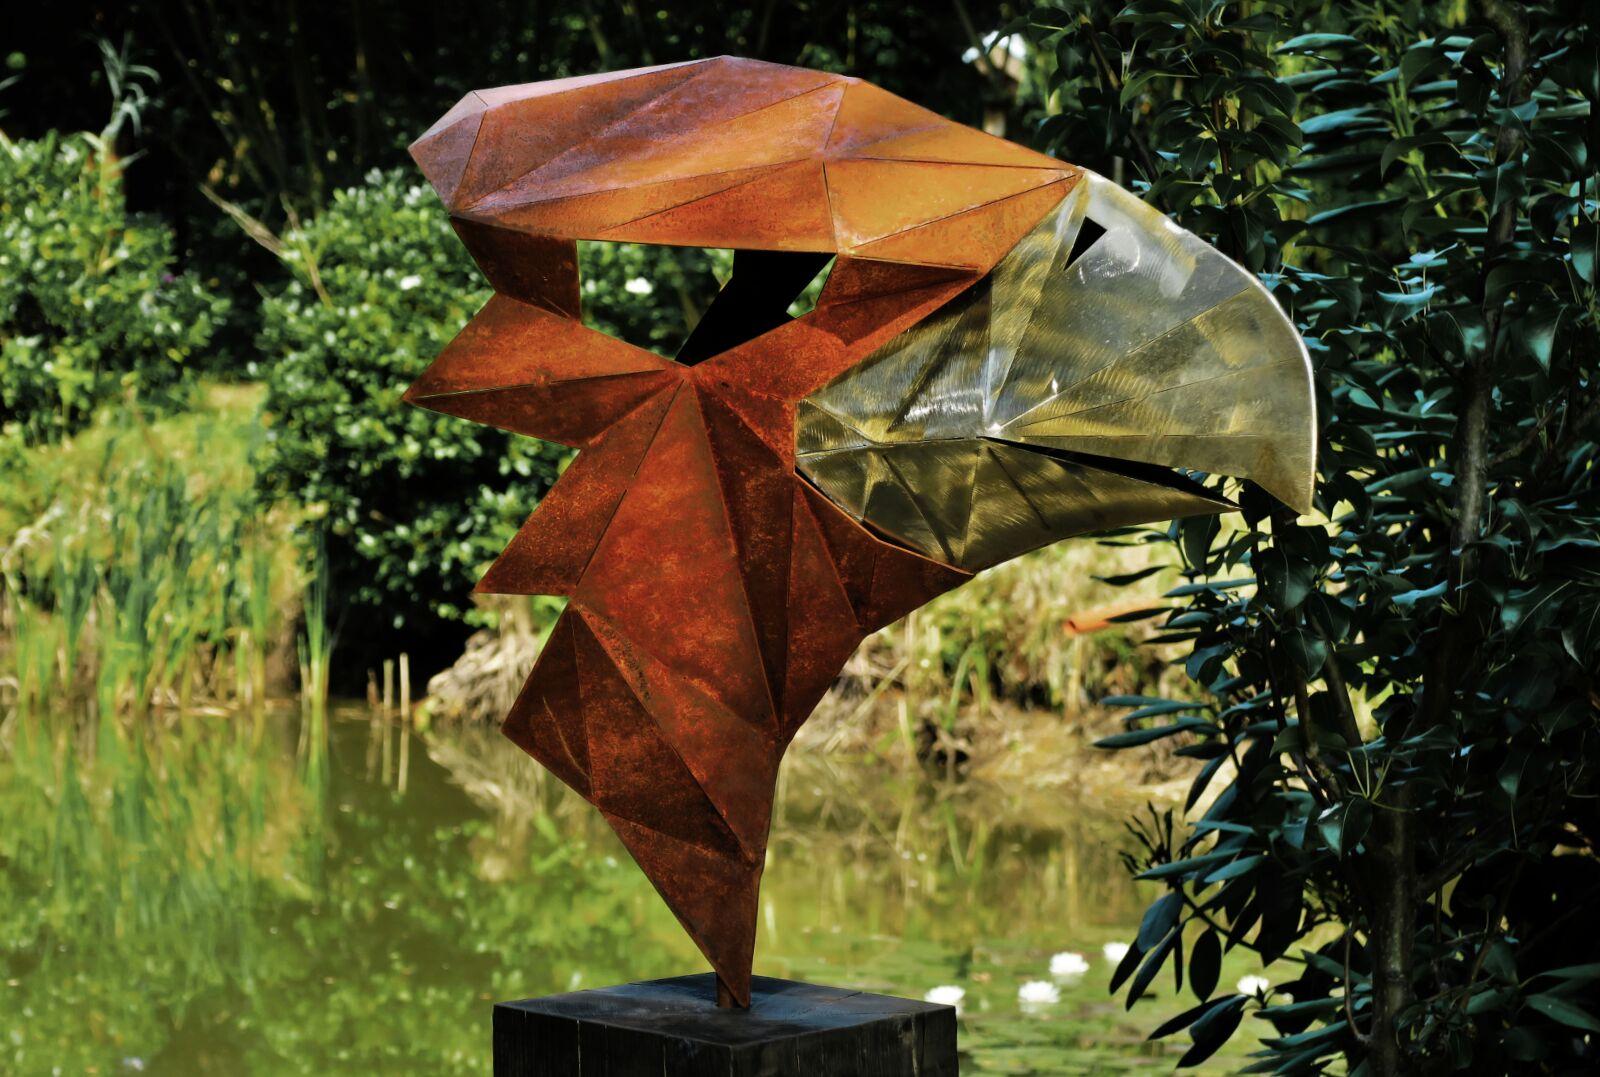 Polygon eagle oxidized on oak column
Extraordinary polygon sculpture eagle with a burner insert
on an oxidised oak column 20 x 20 x 70 cm.
The supplied burner contains lava stones.
This must be filled with liquid bioethanol.

Even with a candle the